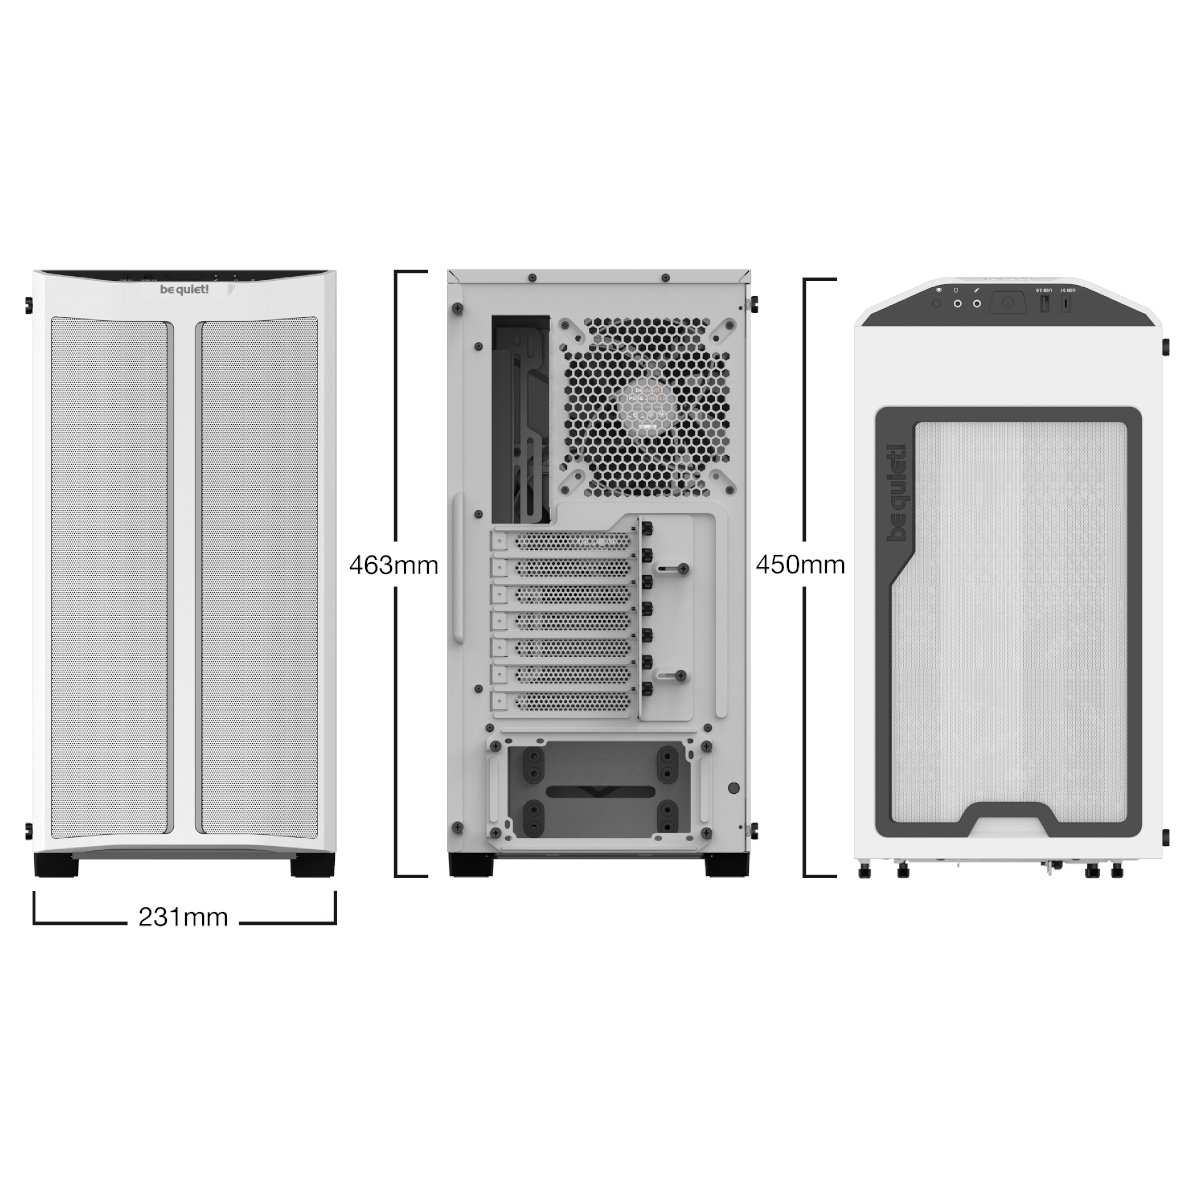  be quiet! Pure Base 500DX ATX Mid Tower PC case, ARGB, 3  Pre-Installed Pure Wings 2 Fans, Tempered Glass Window, Black